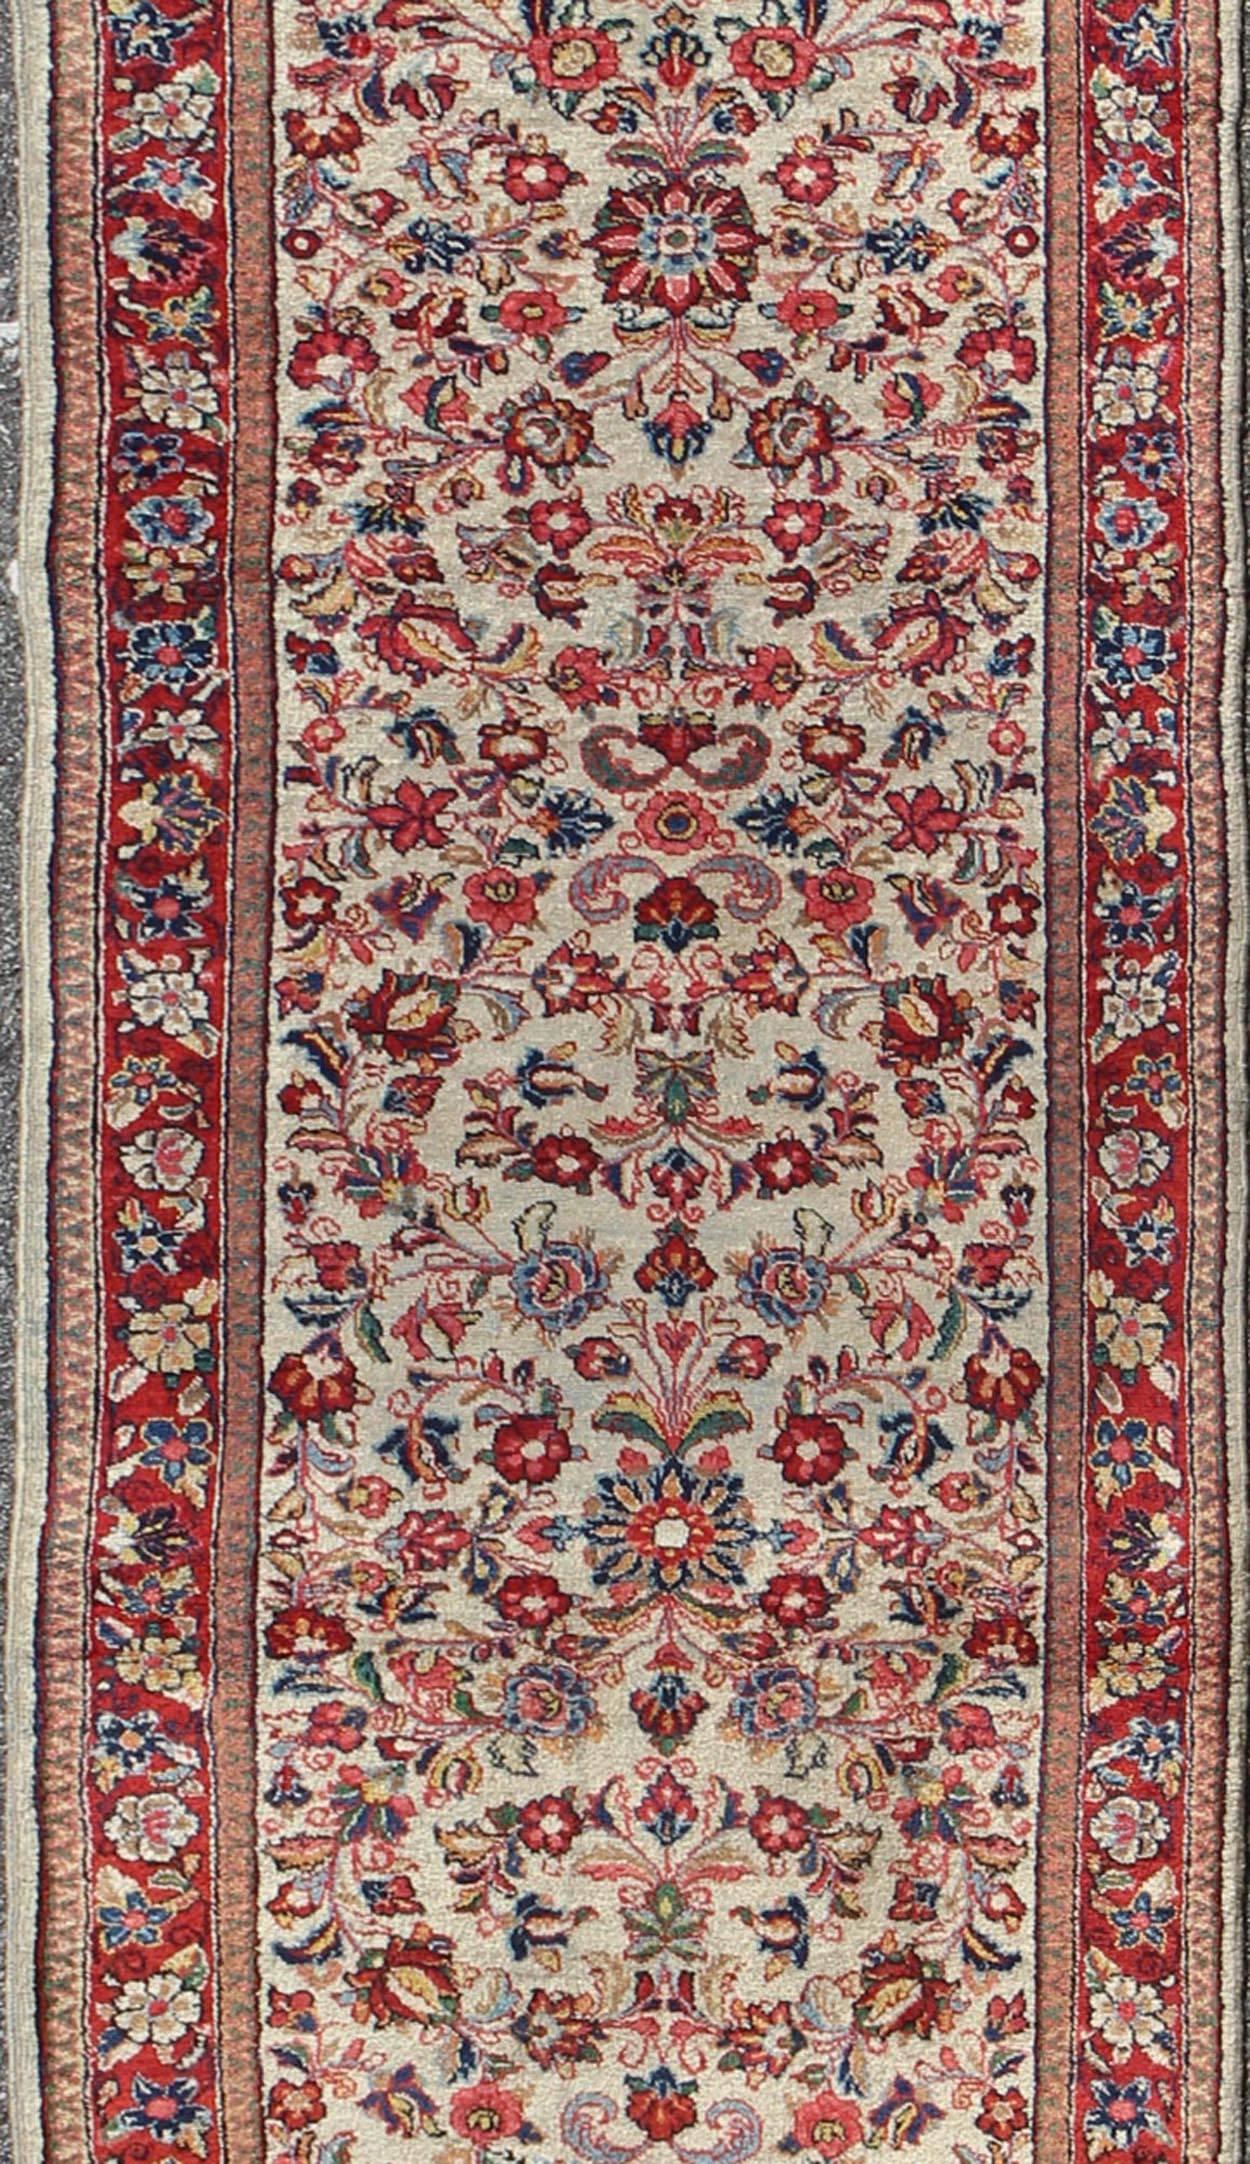 Sarouk Farahan Antique Persian Sarouk Rug with All-Over Floral Design in Rich Red and Ivory For Sale